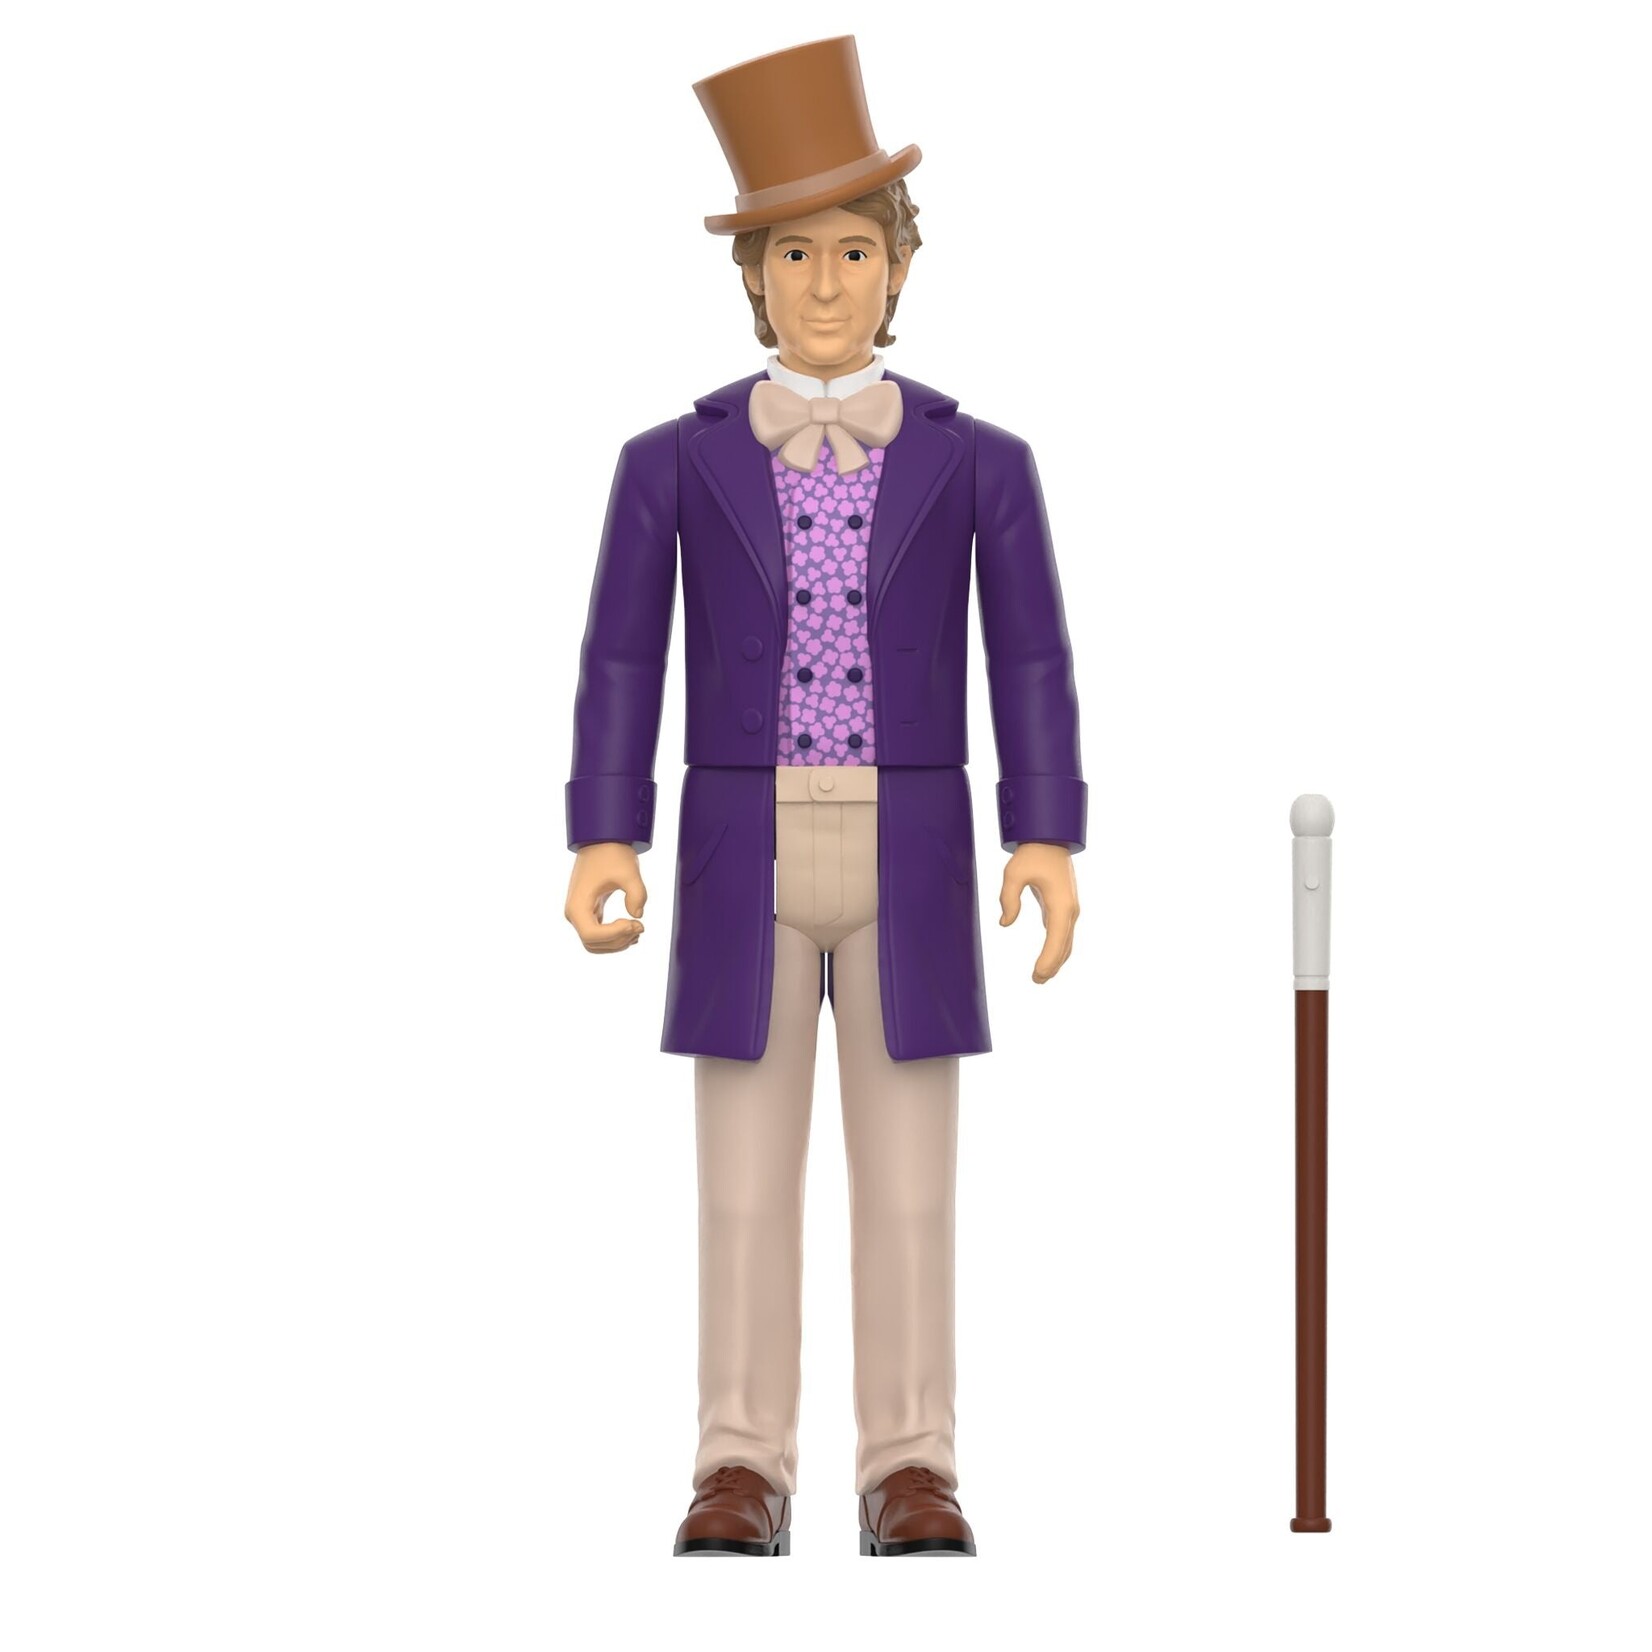 Super7 Super7 Willy Wonka & the Chocolate Factory ReAction Action Figure Willy Wonka 10 cm